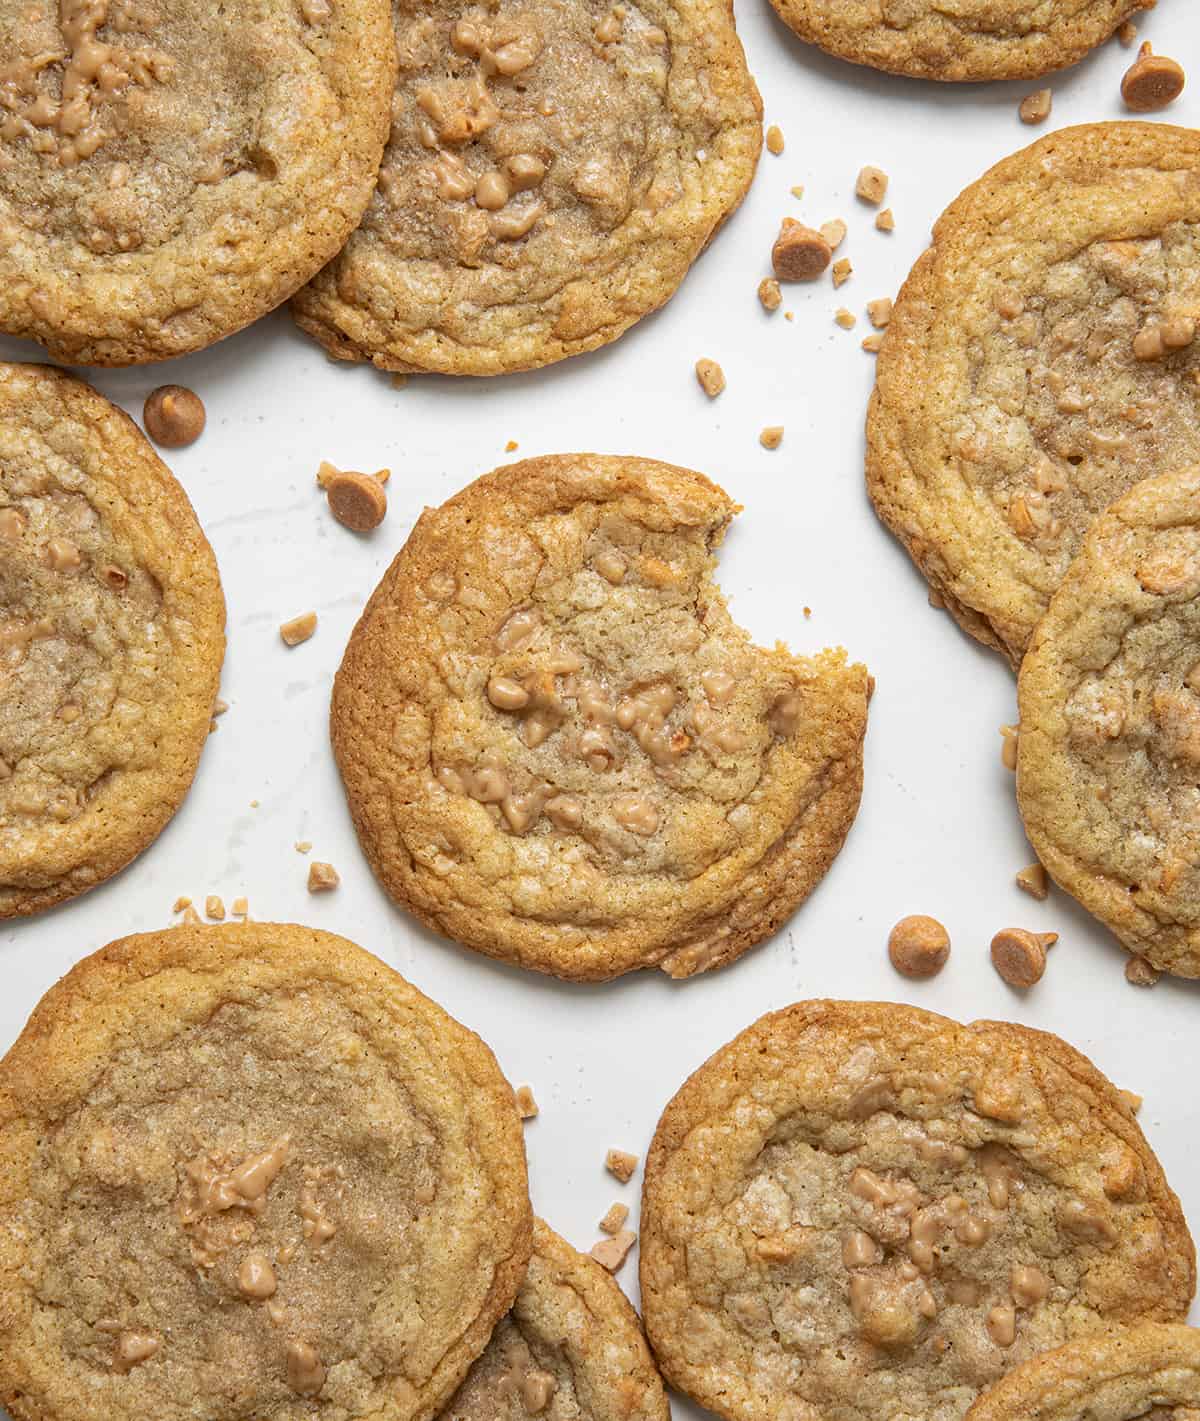 Butterscotch Toffee Cookies on a white table with center cookie having a bite taken out of it.